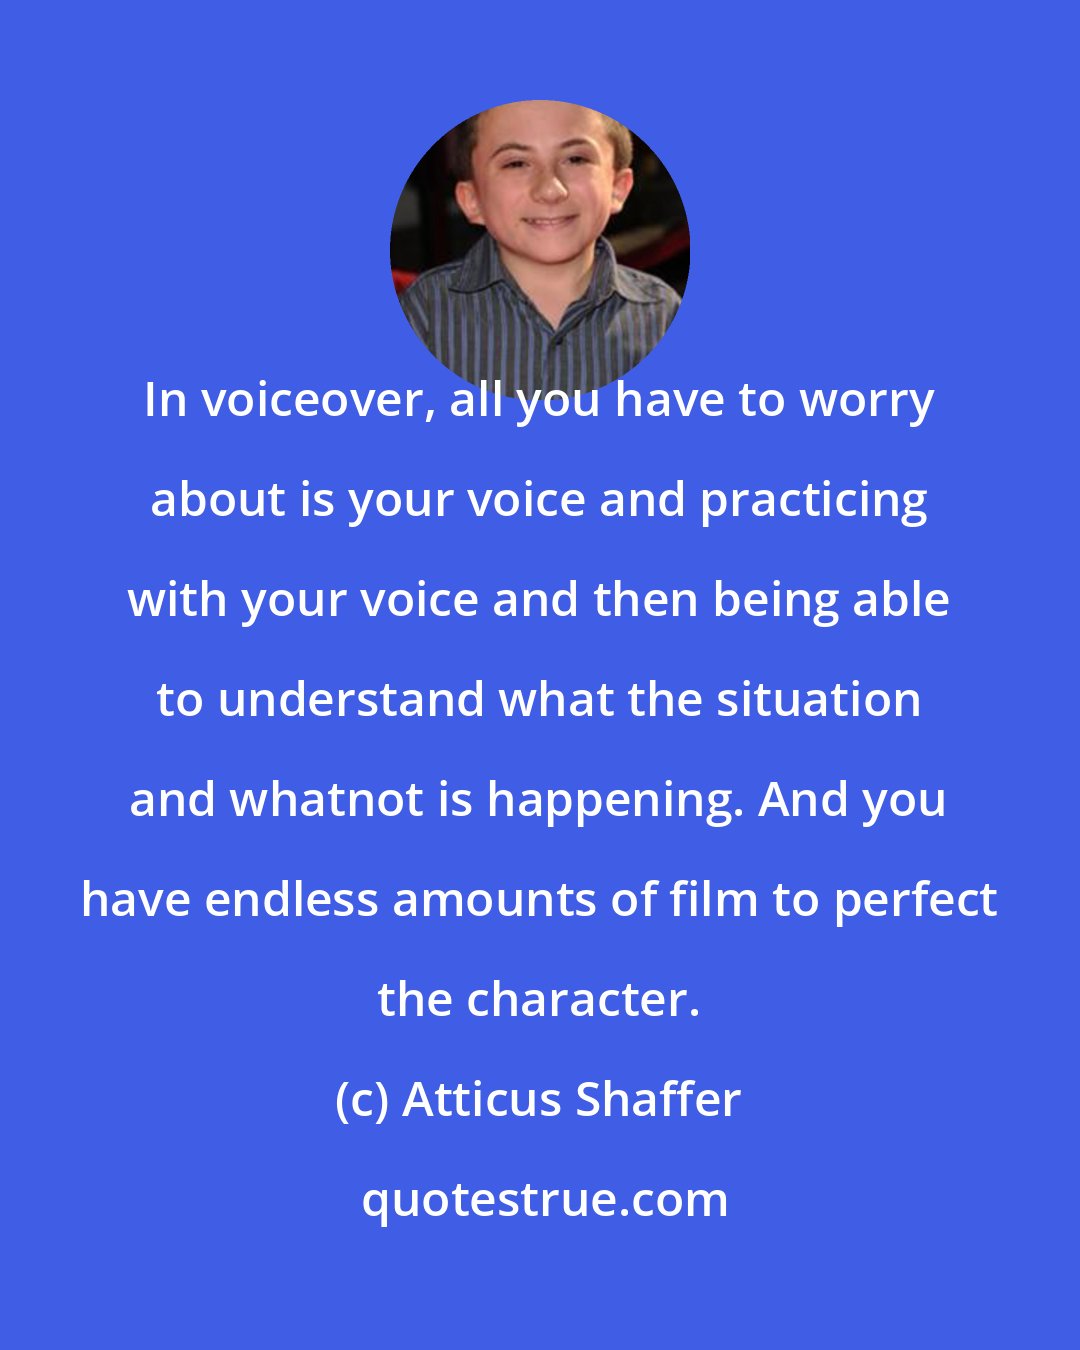 Atticus Shaffer: In voiceover, all you have to worry about is your voice and practicing with your voice and then being able to understand what the situation and whatnot is happening. And you have endless amounts of film to perfect the character.